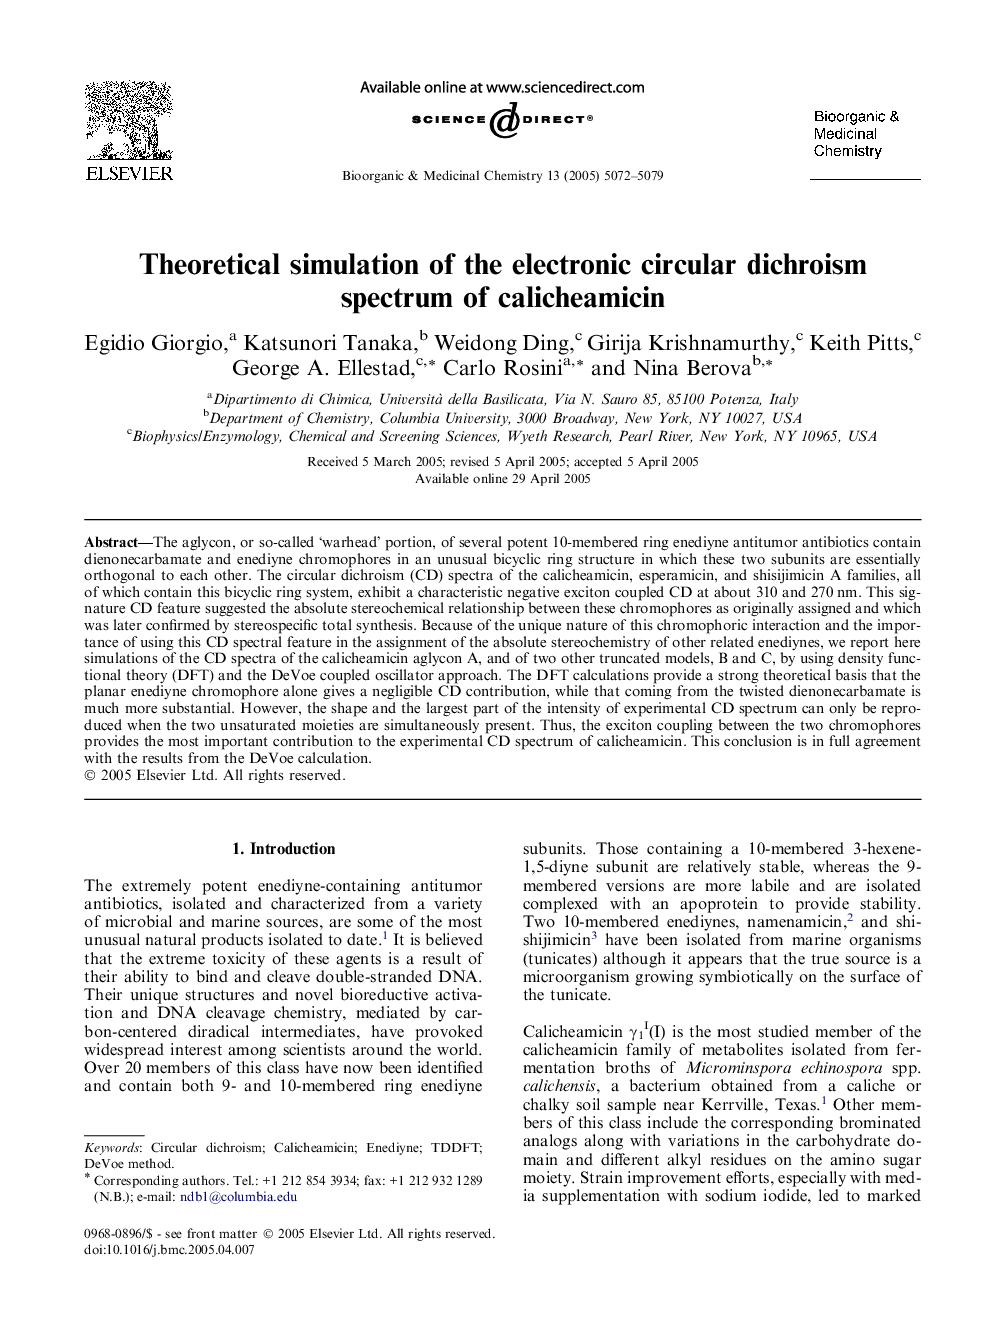 Theoretical simulation of the electronic circular dichroism spectrum of calicheamicin